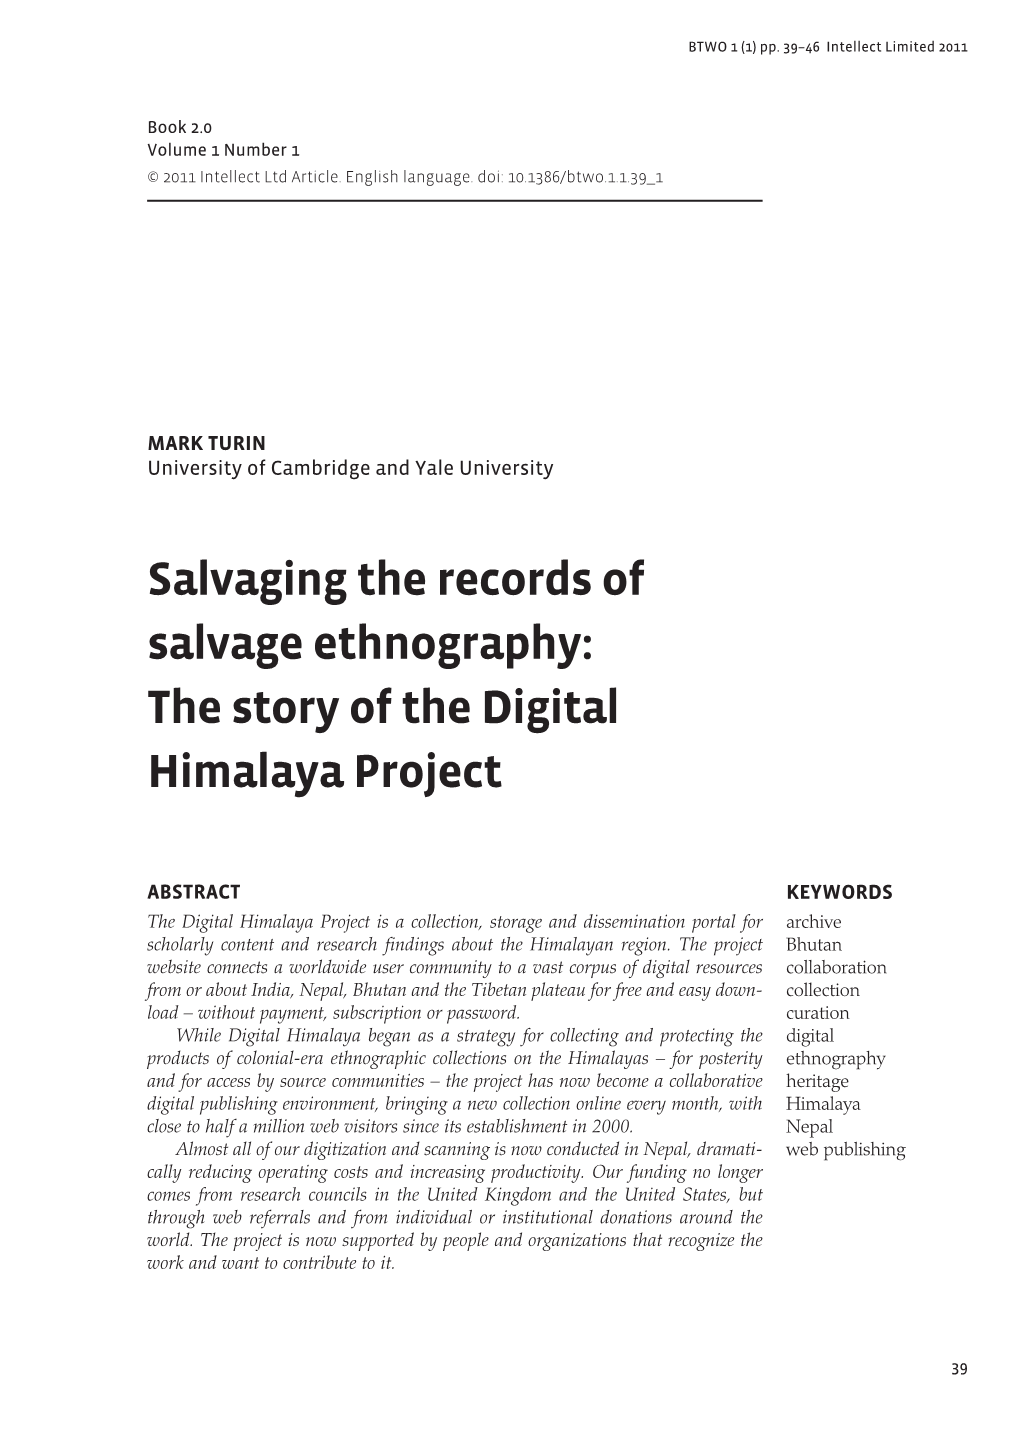 Salvaging the Records of Salvage Ethnography: the Story of the Digital Himalaya Project